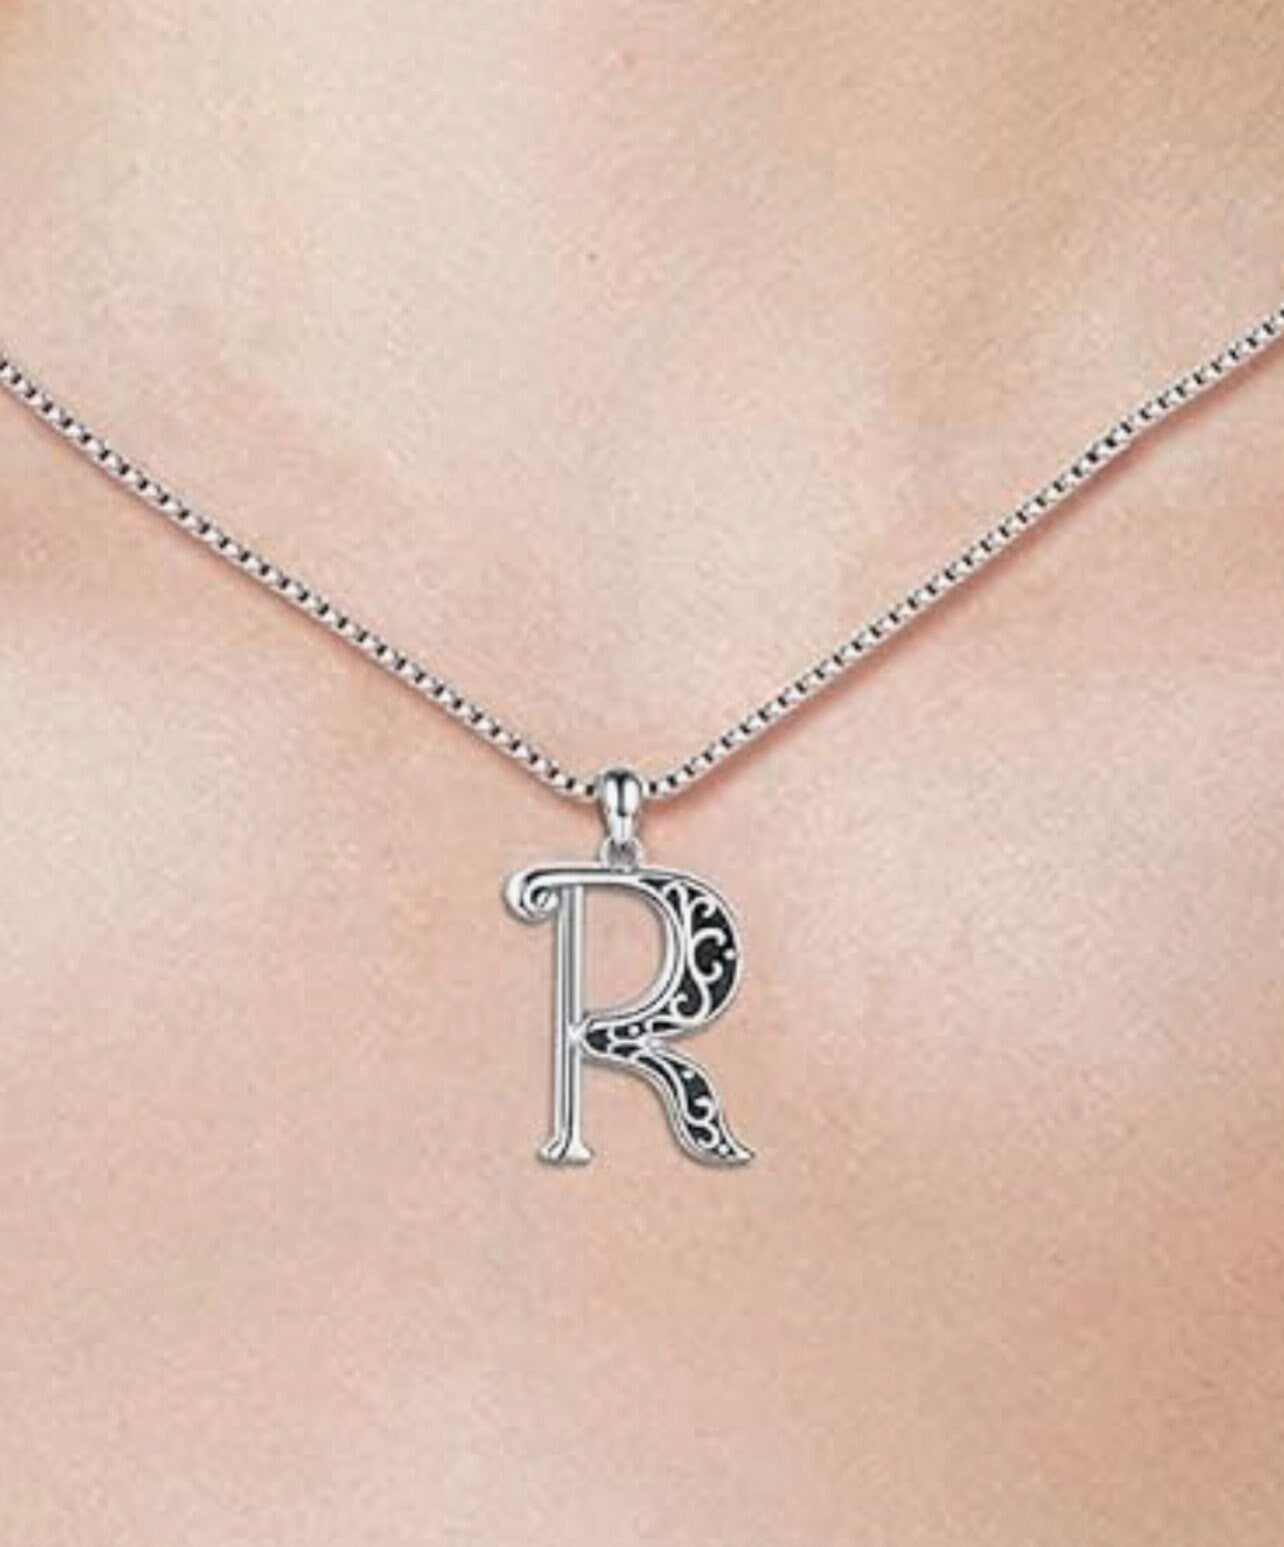 Urn necklace, personalized initial urn pendant for ashes, ash holder, cremation jewelry, memorial keepsake jewelry, urns for ashes, memory